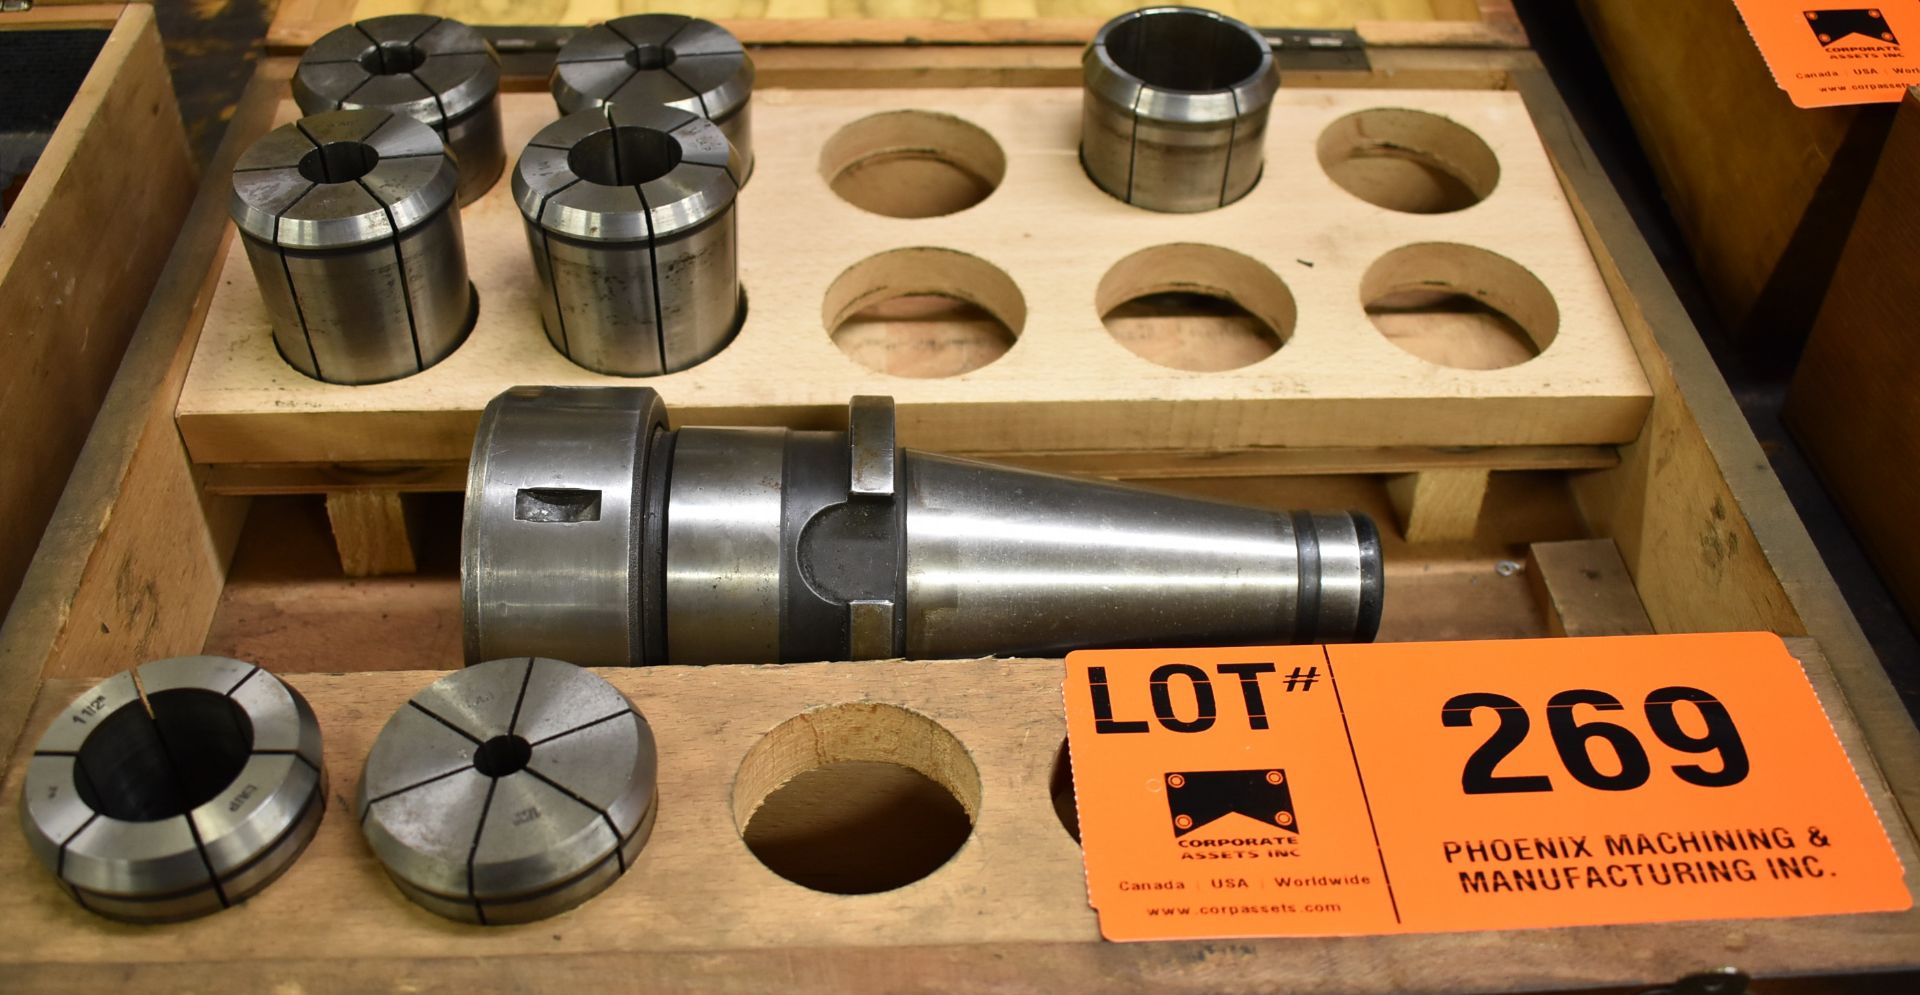 50 TAPER COLLET CHUCK WITH COLLETS